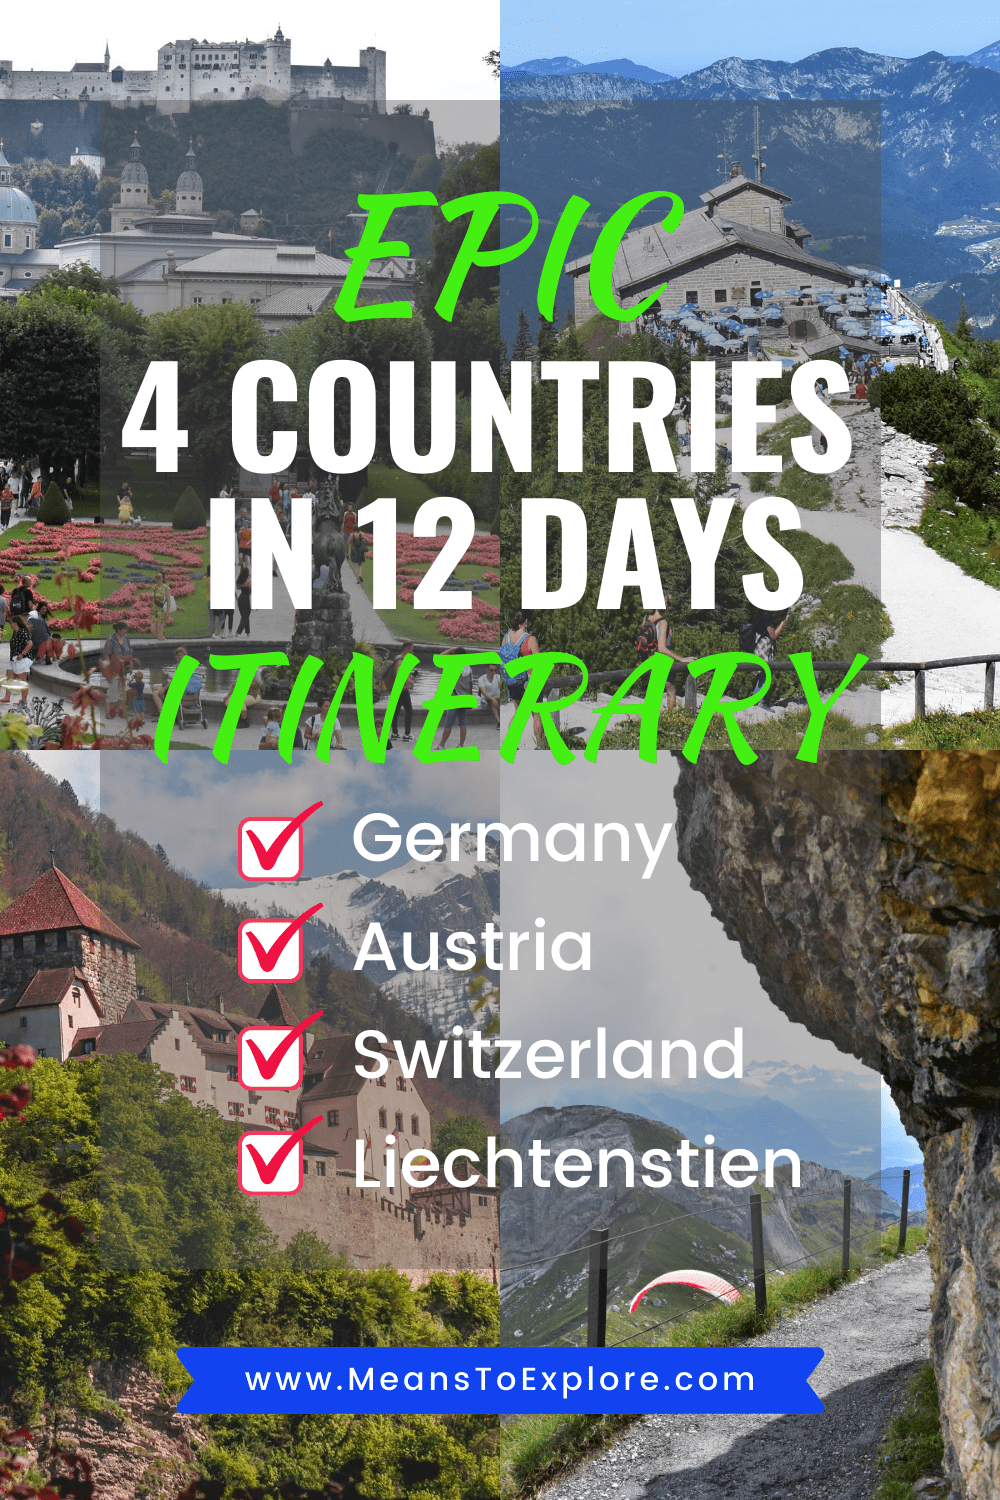 Epic 4 Countries in 12 Days European Itinerary for an Amazing Vacation